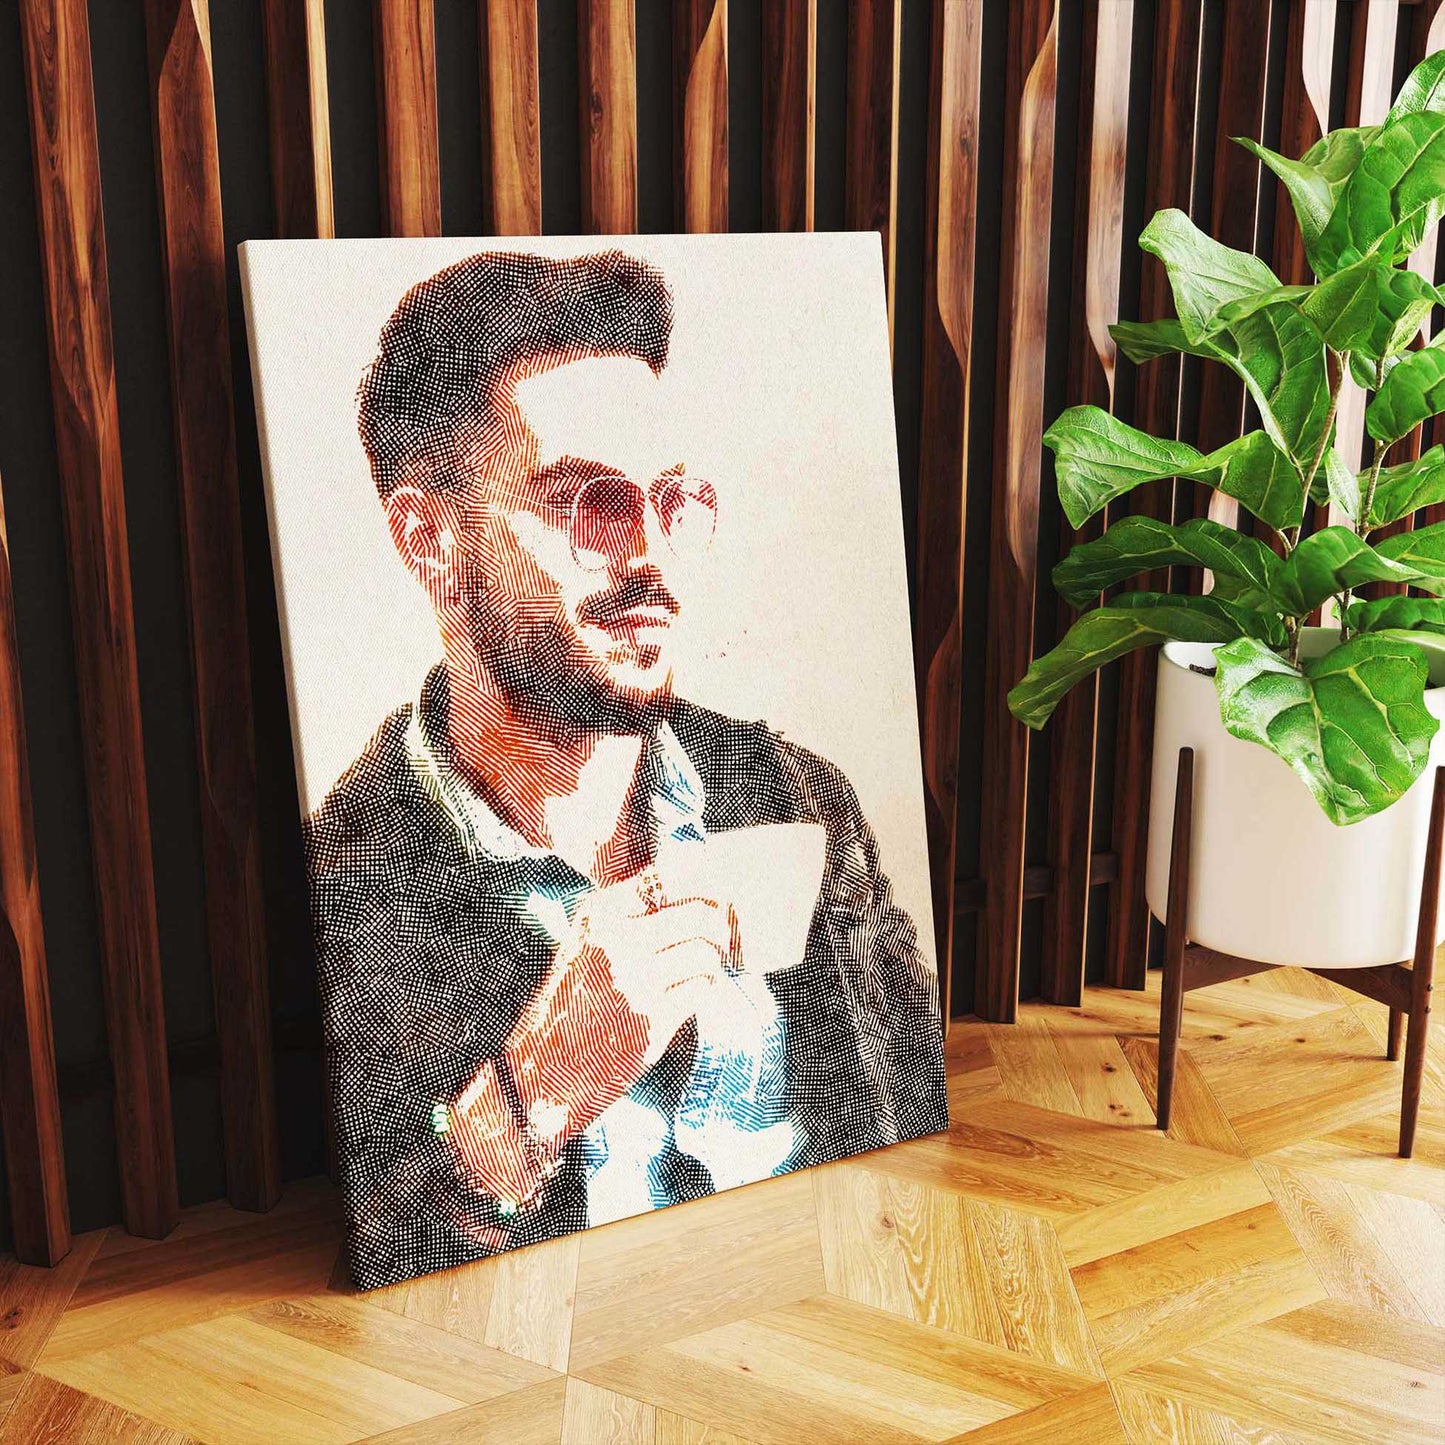 Immerse yourself in the artistry of our Personalised Crosshatch Canvas, a masterpiece with a chic and modern appeal. From a photo, we create a stunning digital artwork that replicates the crosshatch look, giving the real canvas a texture